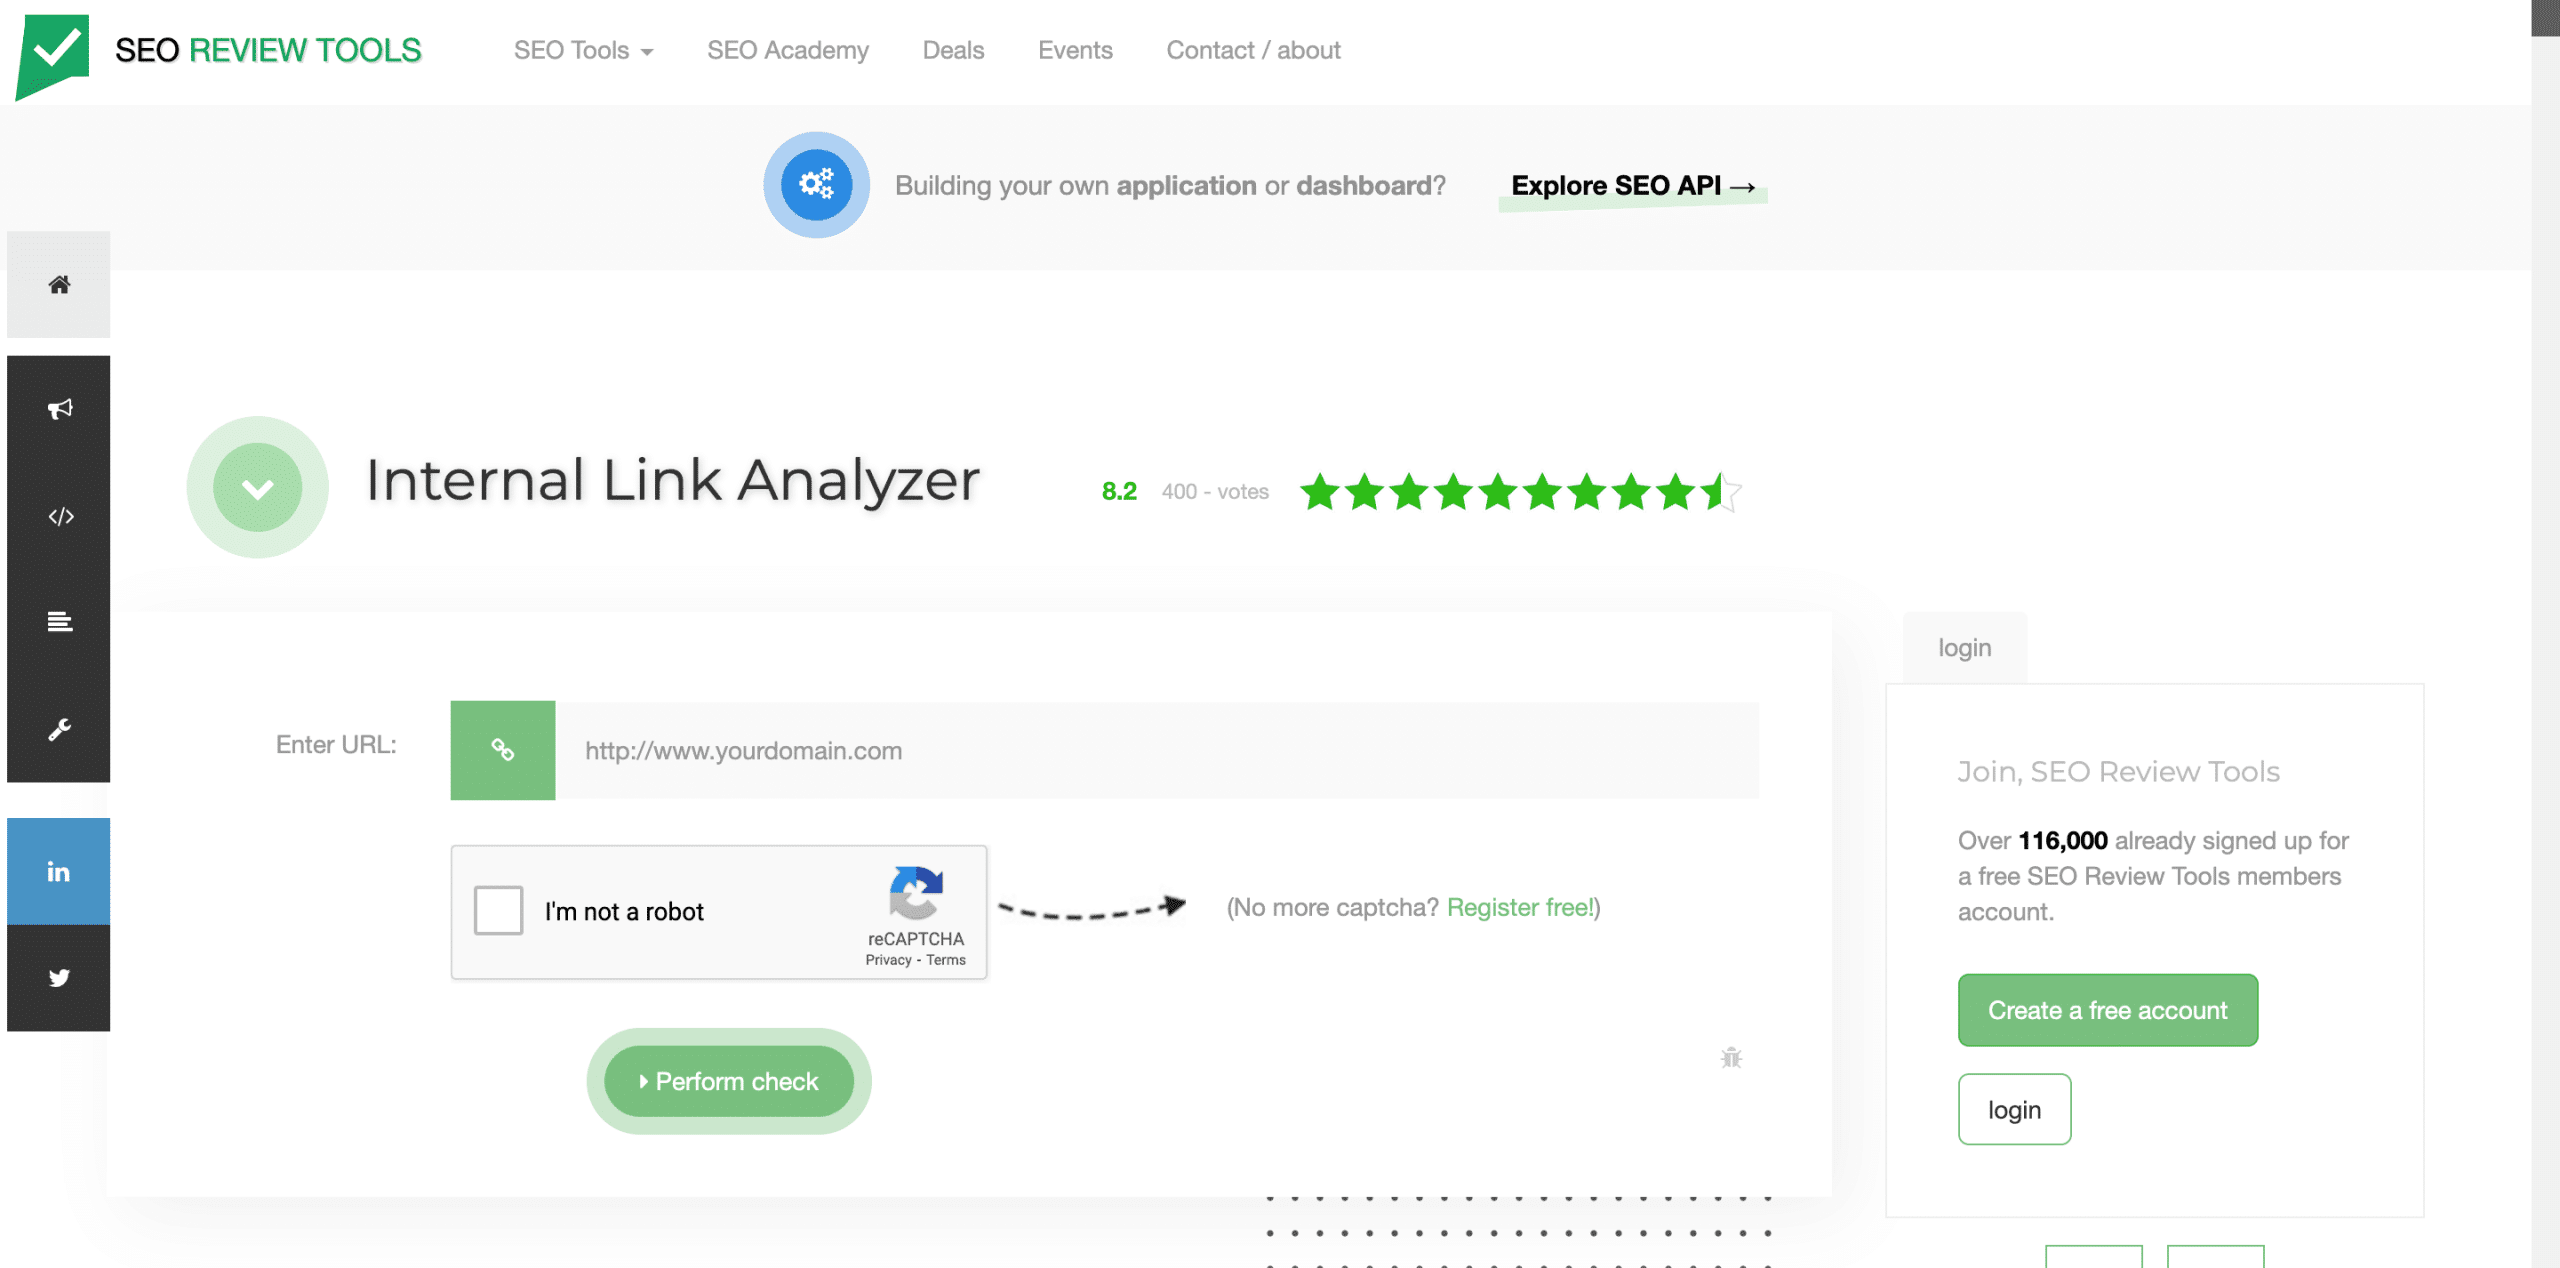 Internal Link Analyzer by SEO Review Tools